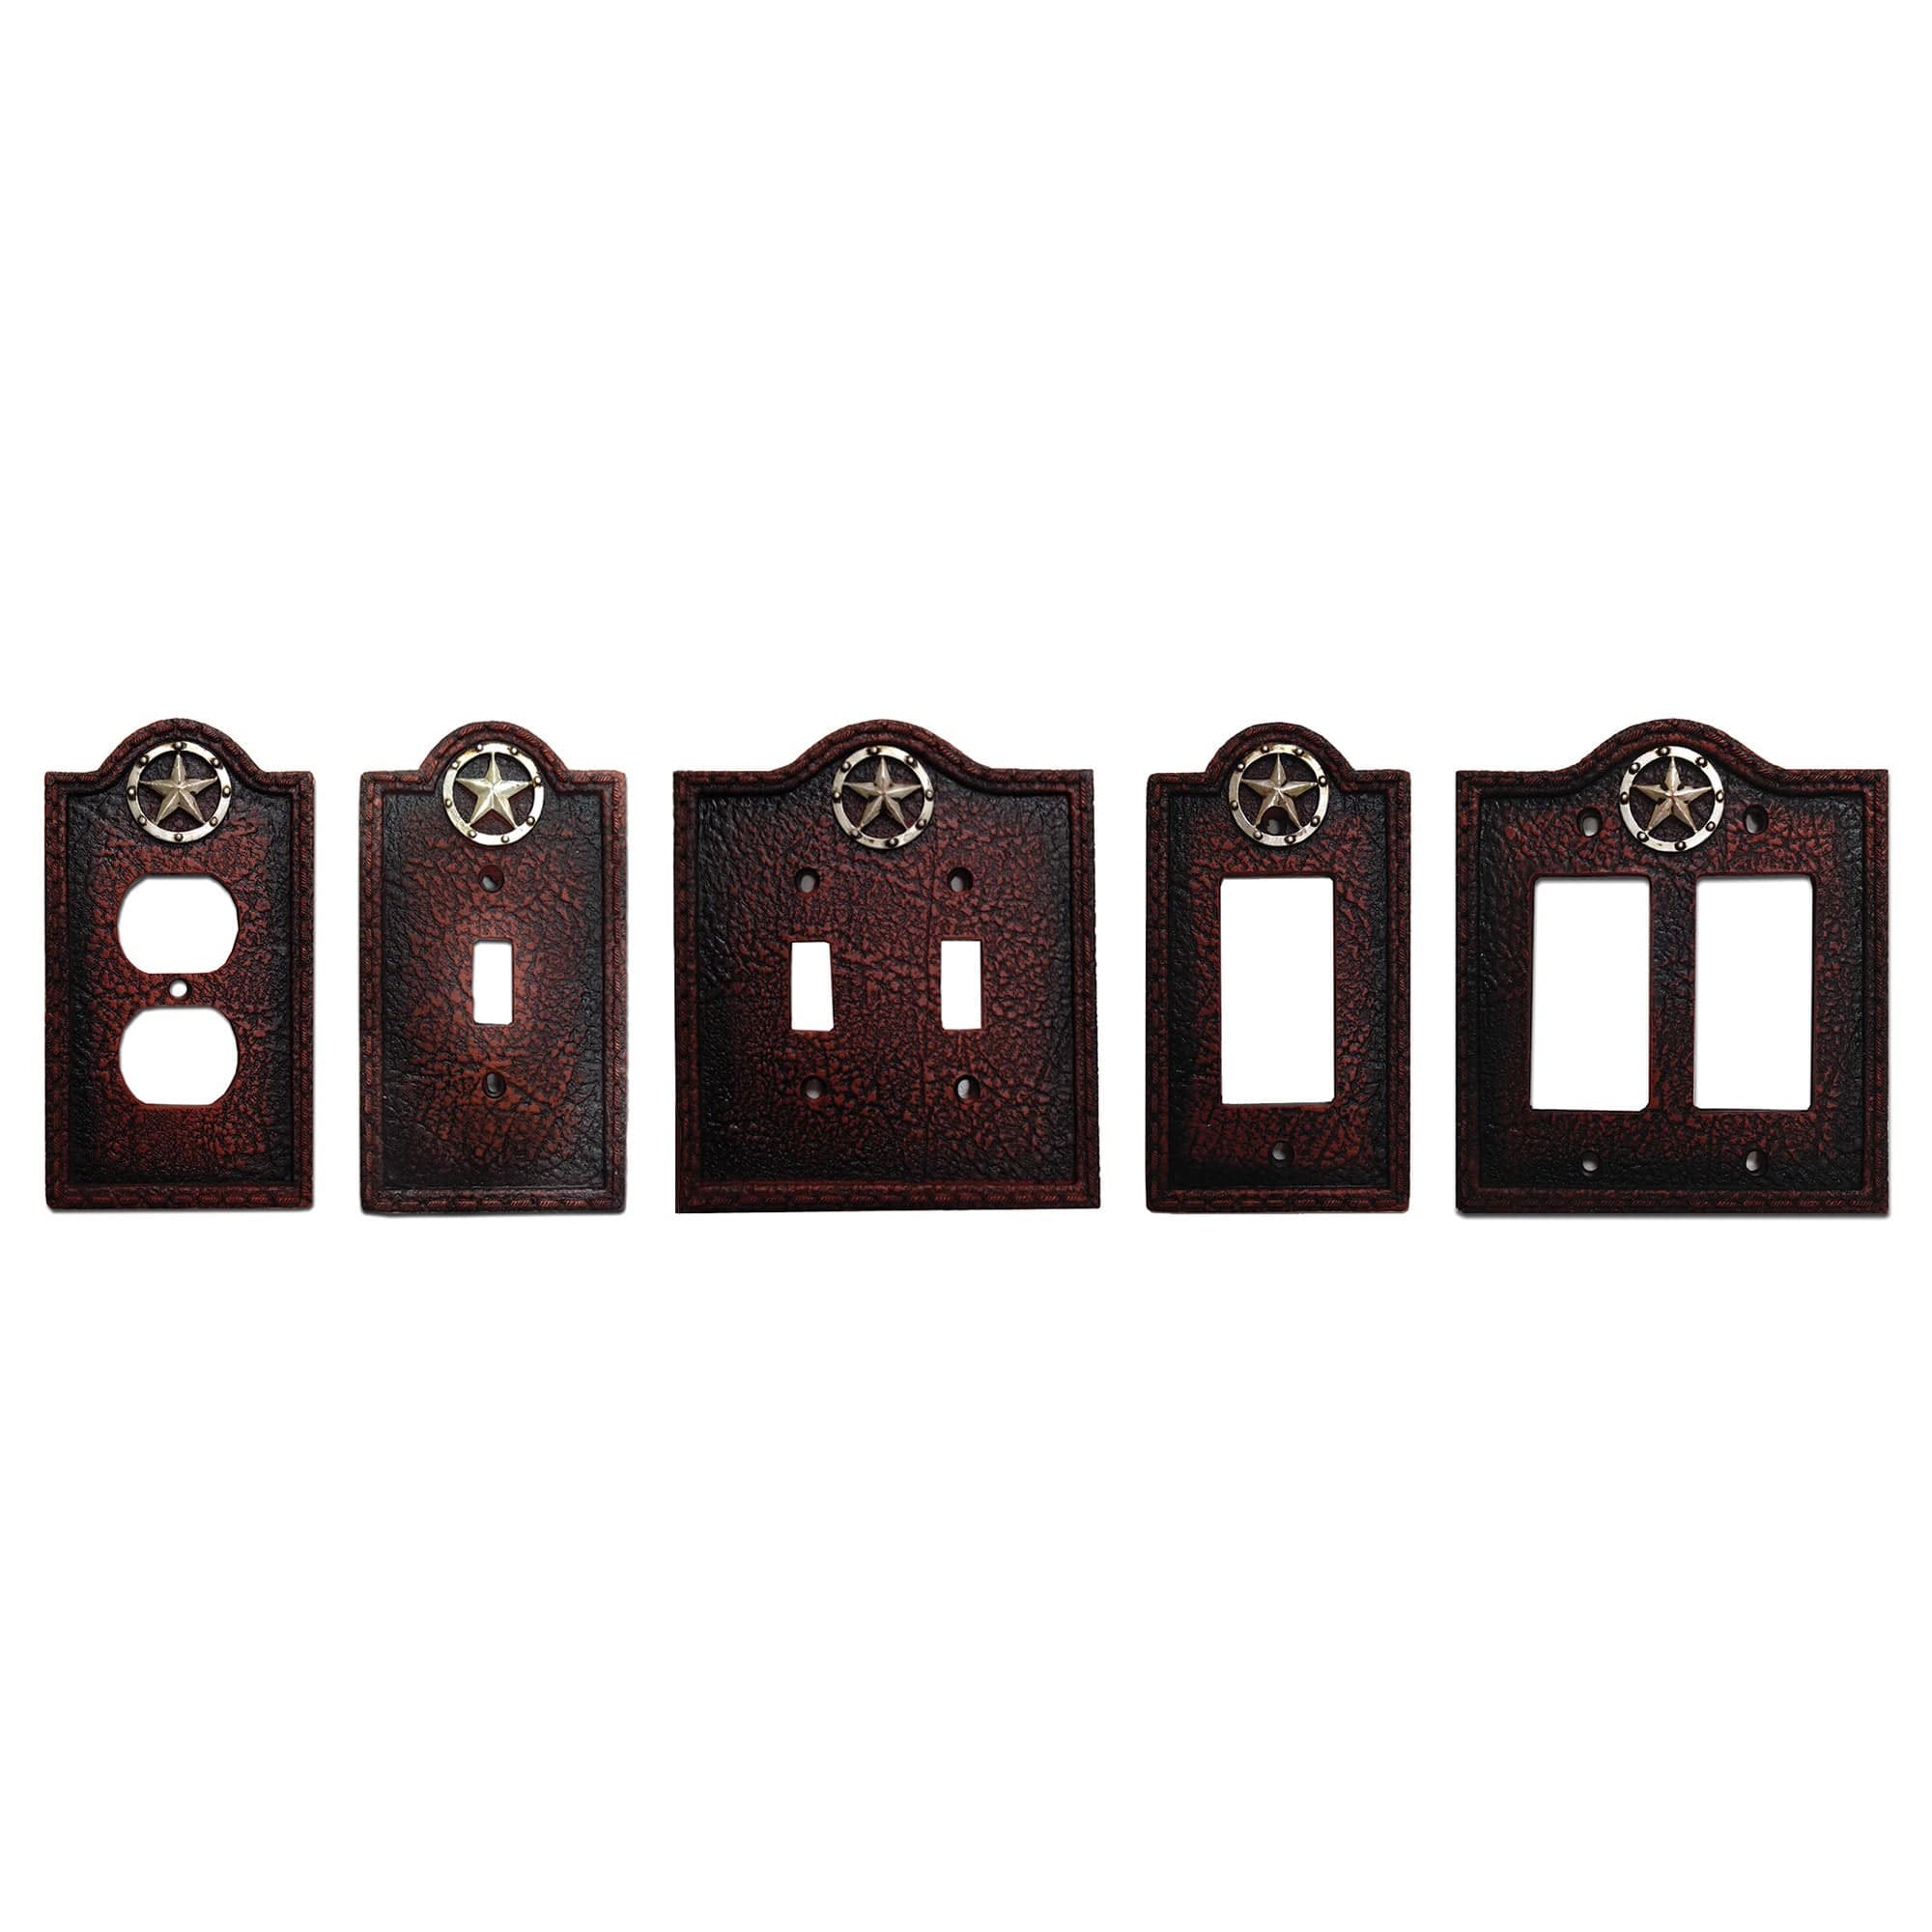 Leather Grain Single Switch Wall Plate Switch Plates & Outlet Covers